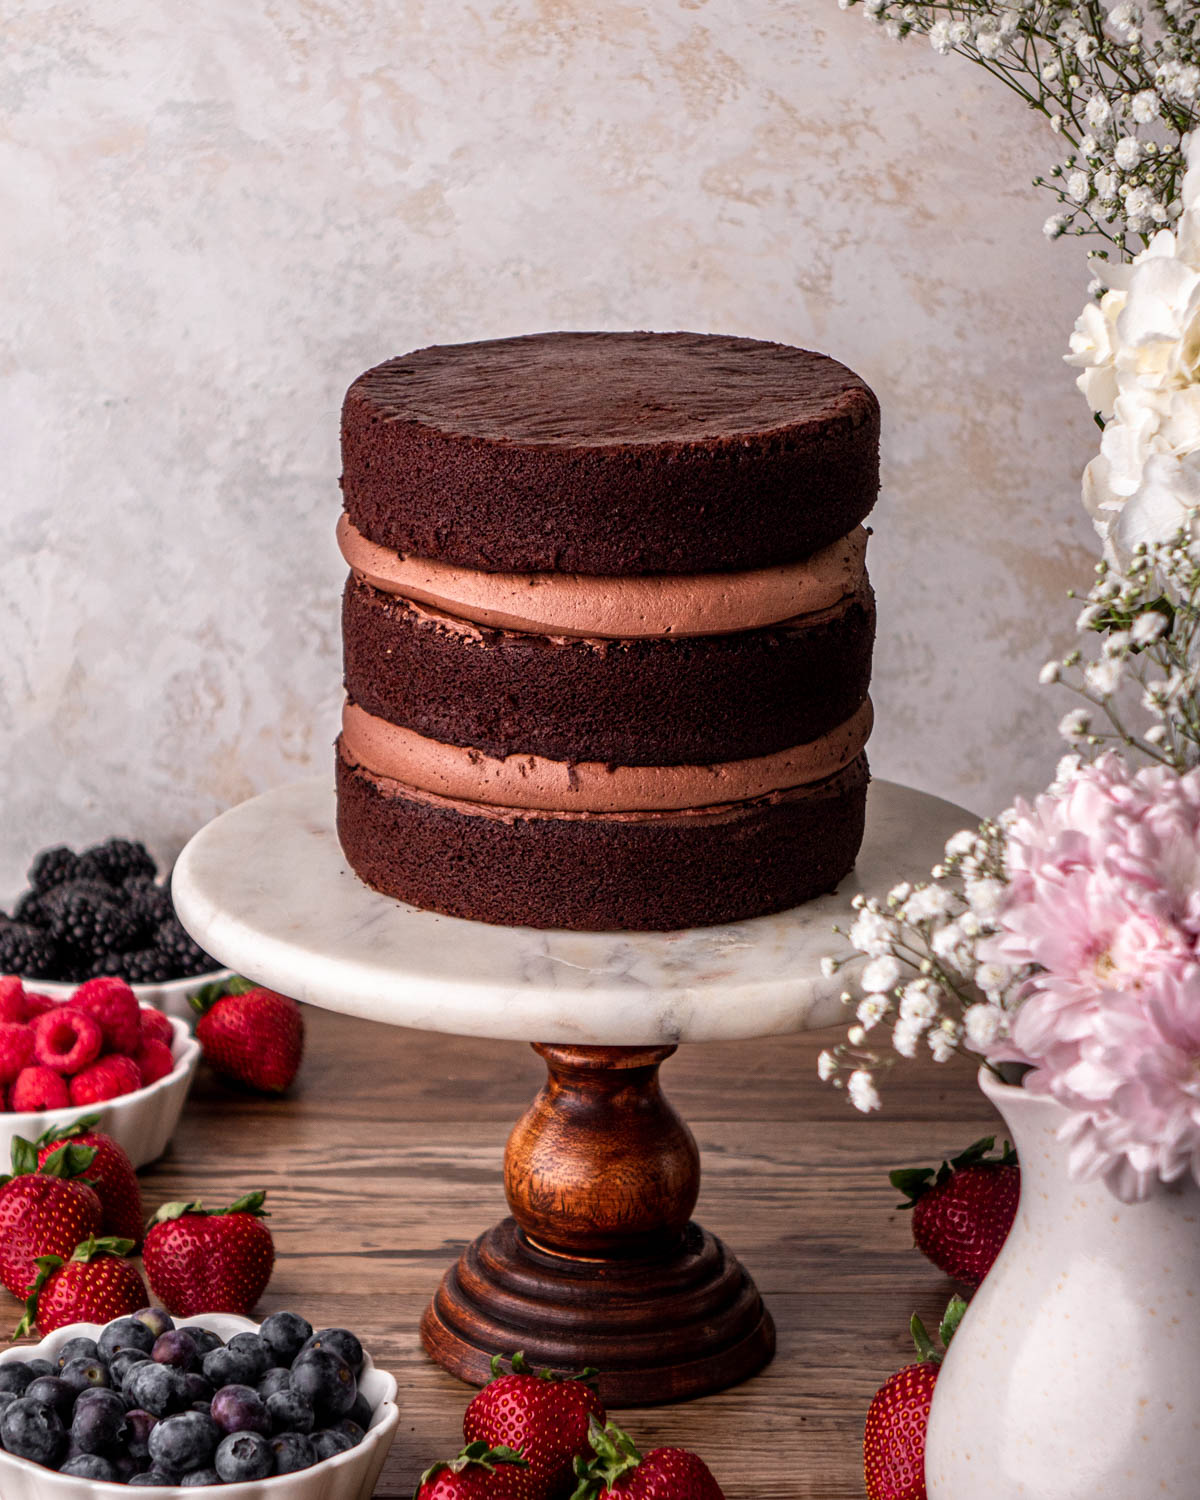 three cake layers stacked with chocolate buttercream borders and jam filling